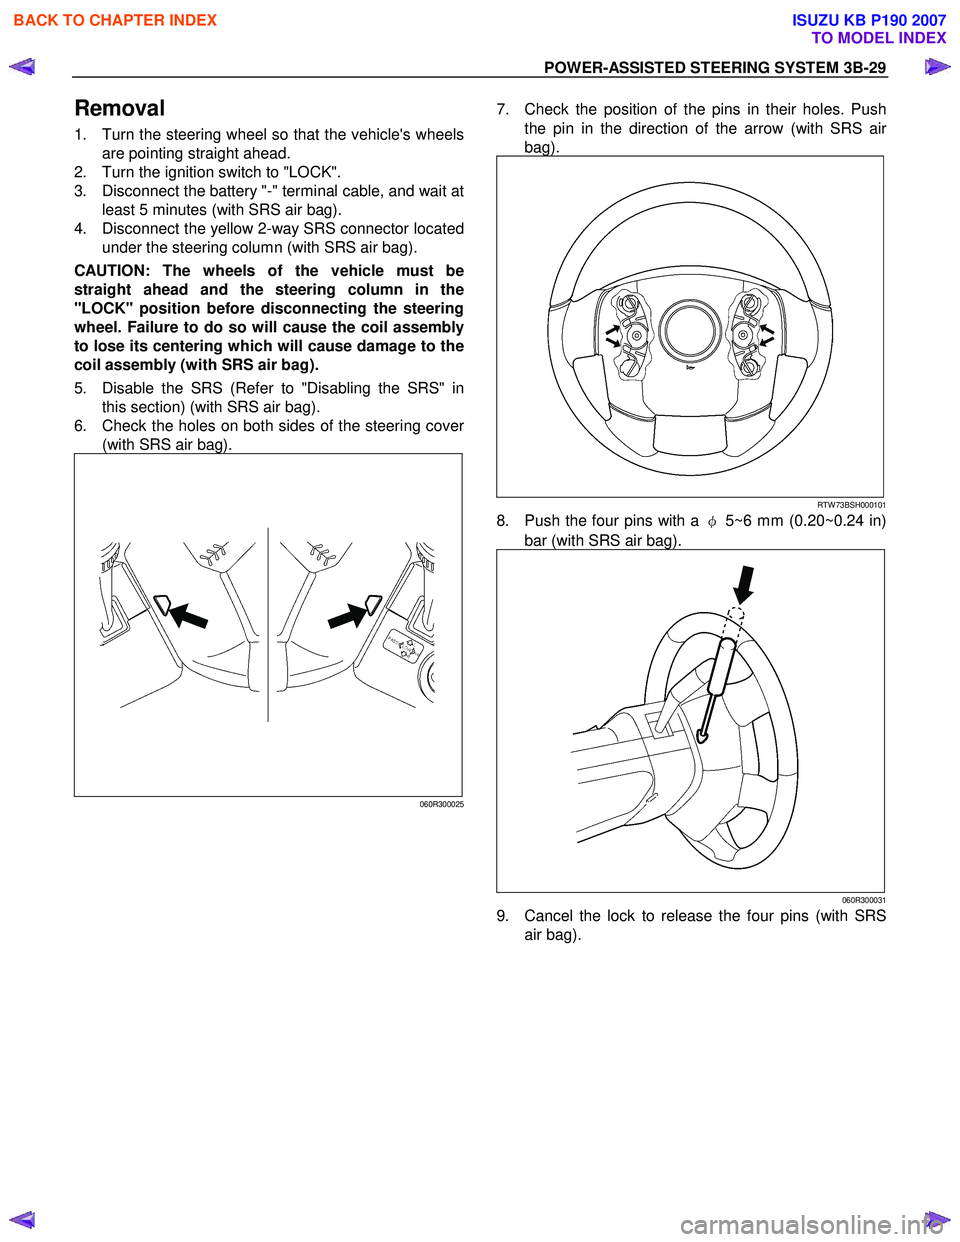 ISUZU KB P190 2007  Workshop Owners Manual POWER-ASSISTED STEERING SYSTEM 3B-29 
Removal 
1.  Turn the steering wheel so that the vehicles wheels
are pointing straight ahead. 
2.  Turn the ignition switch to "LOCK".  
3.  Disconnect the batte